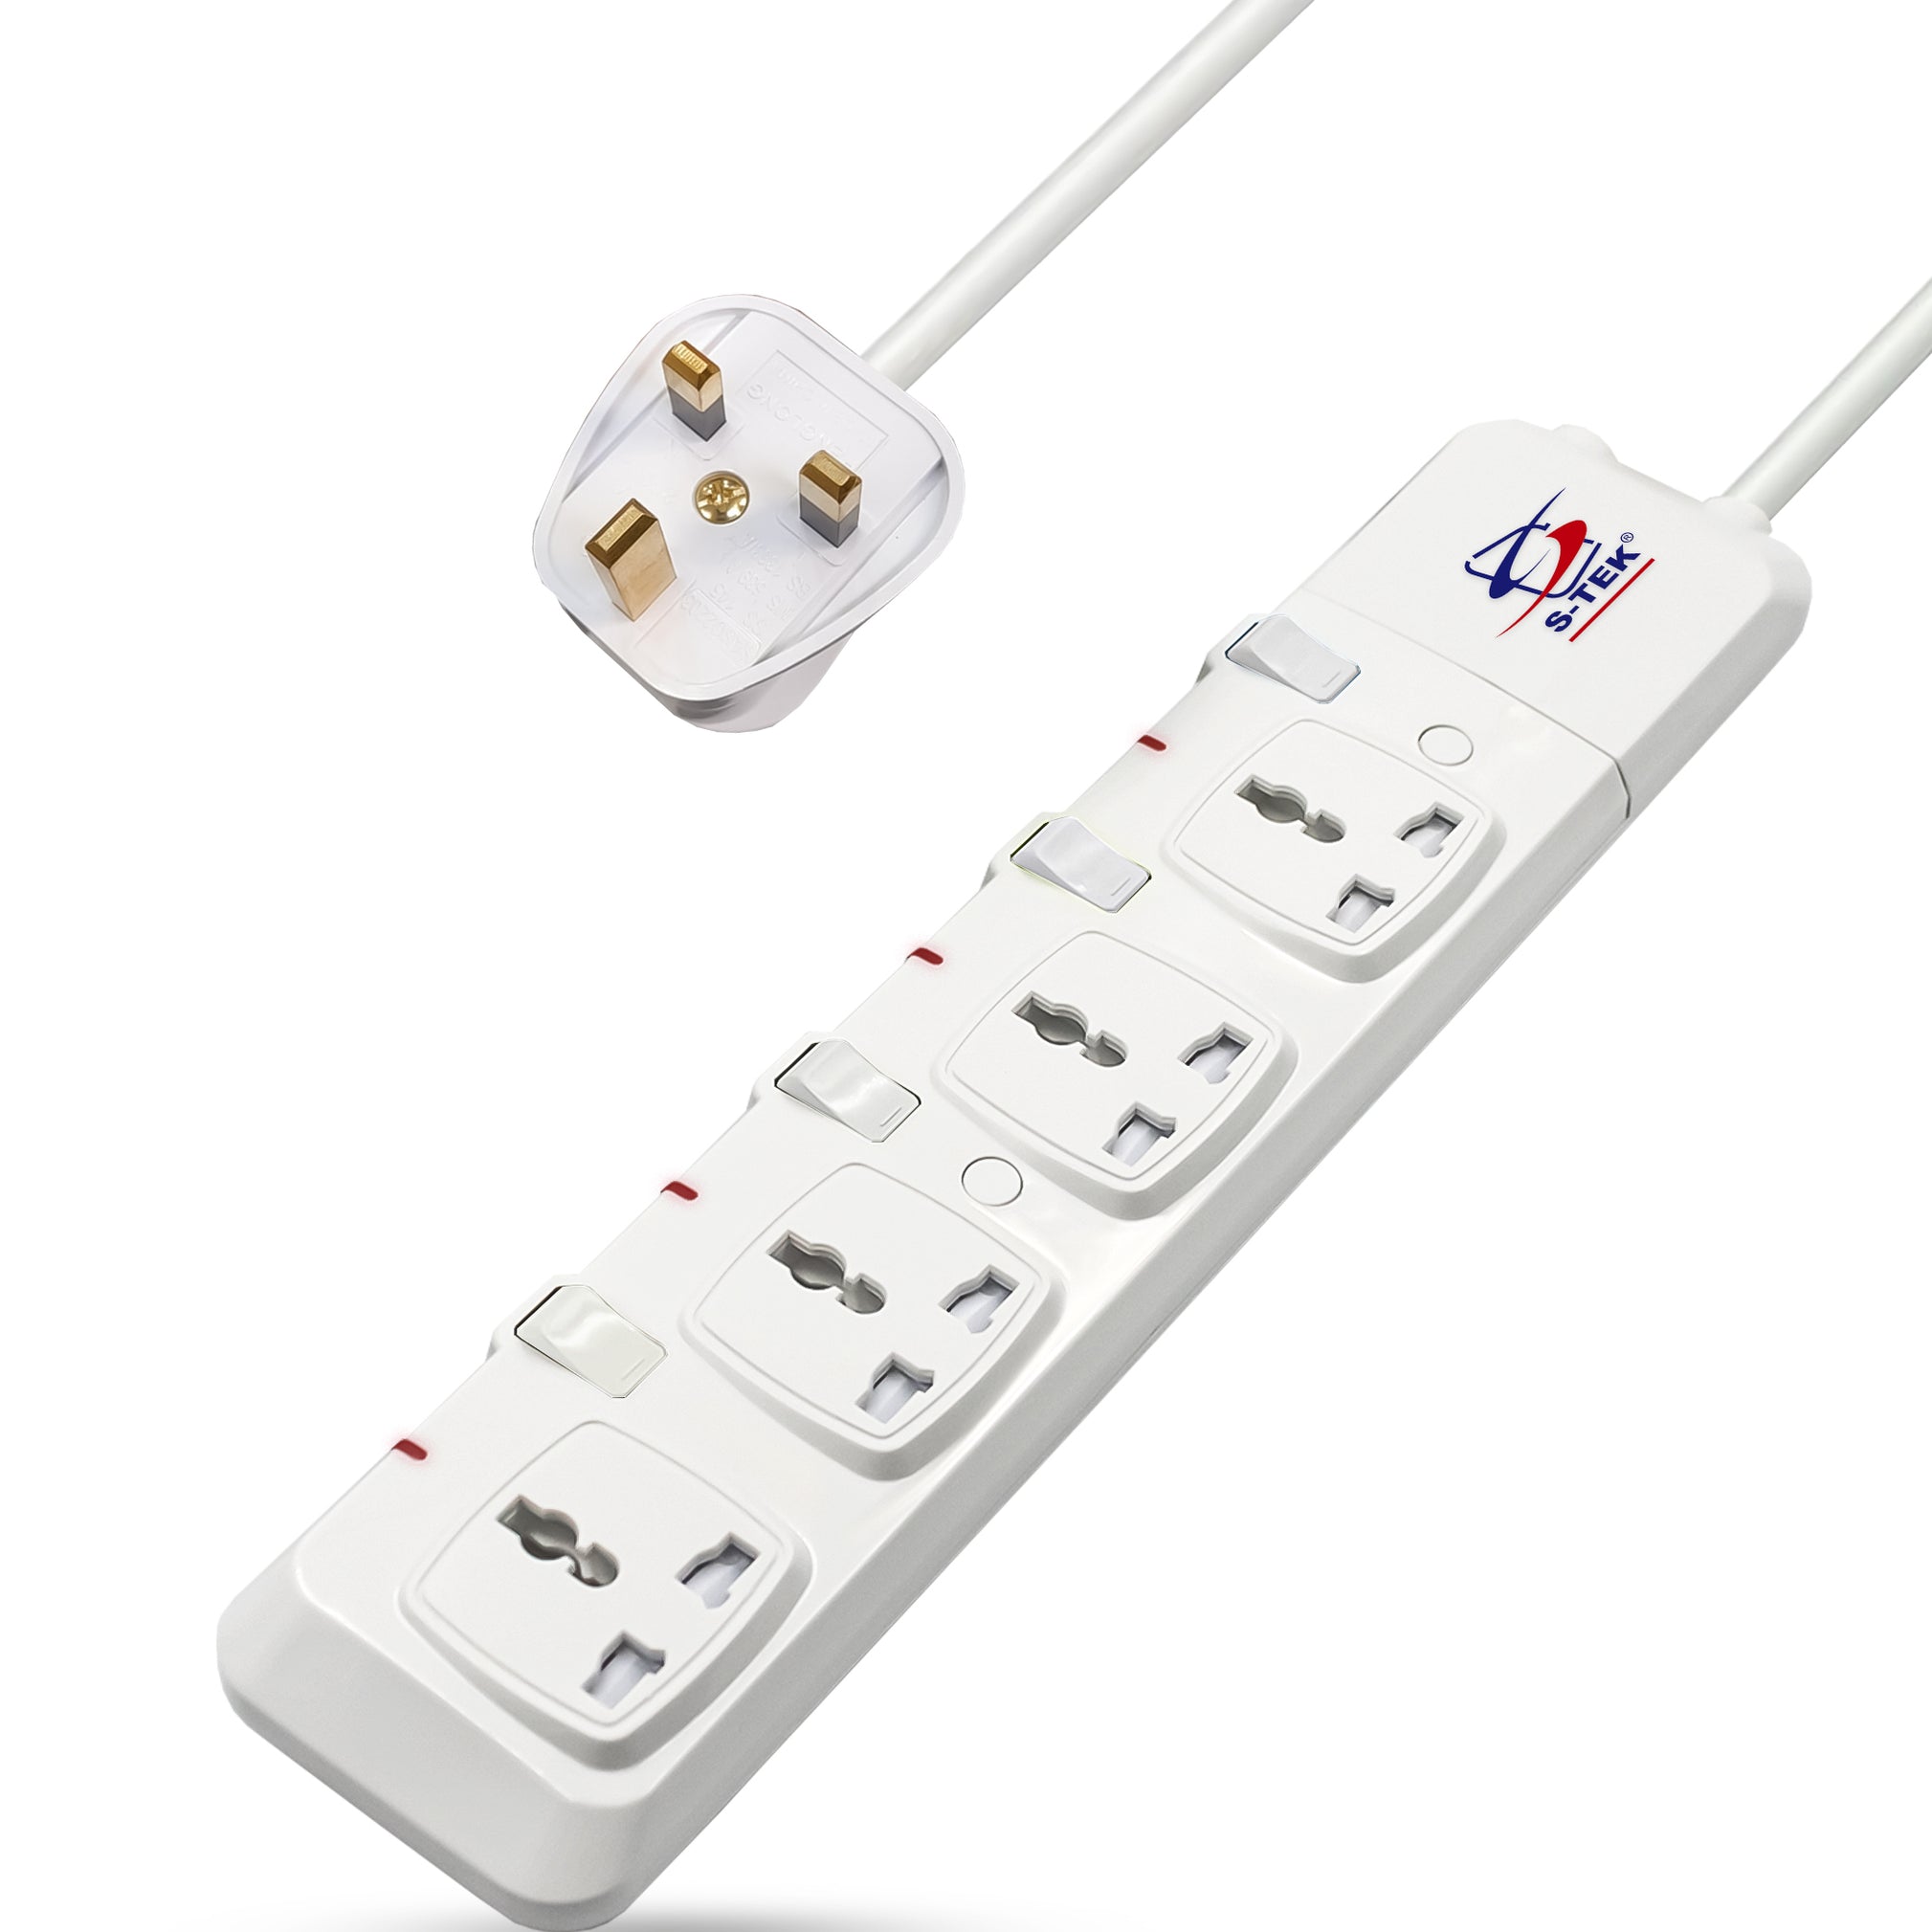 S-TEK Universal Power Extension Socket with Individual Switch